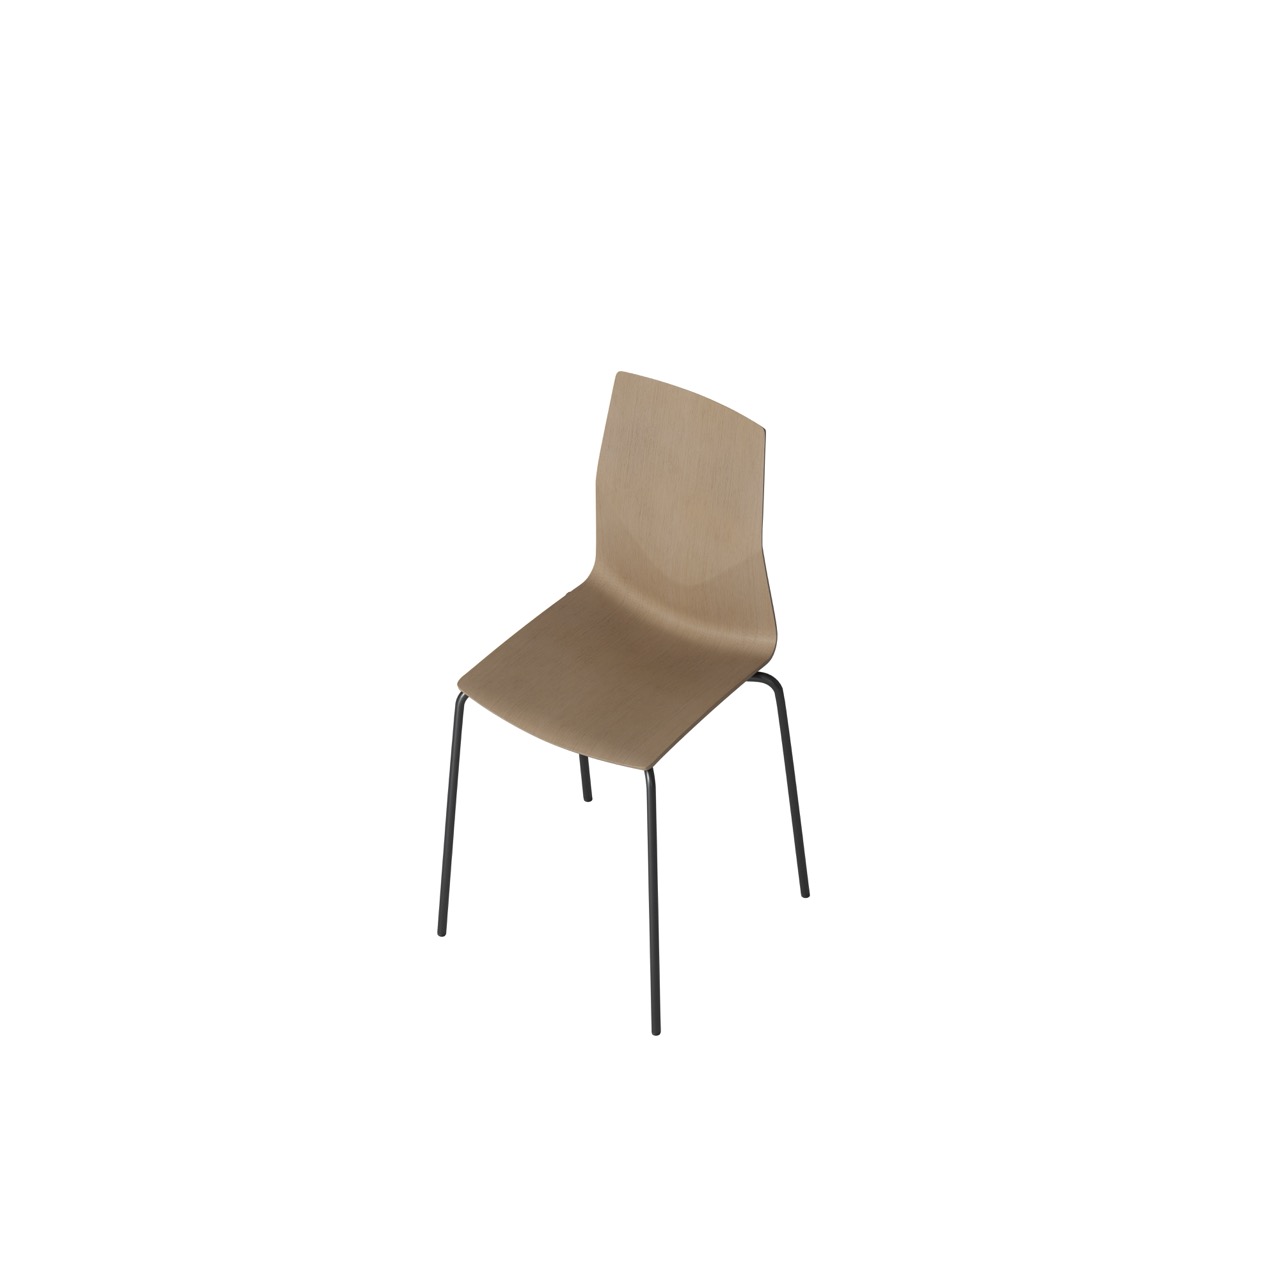 OCEE&FOUR – Chairs – FourCast 2 Four – Veneer shell - Packshot Image 4 Large